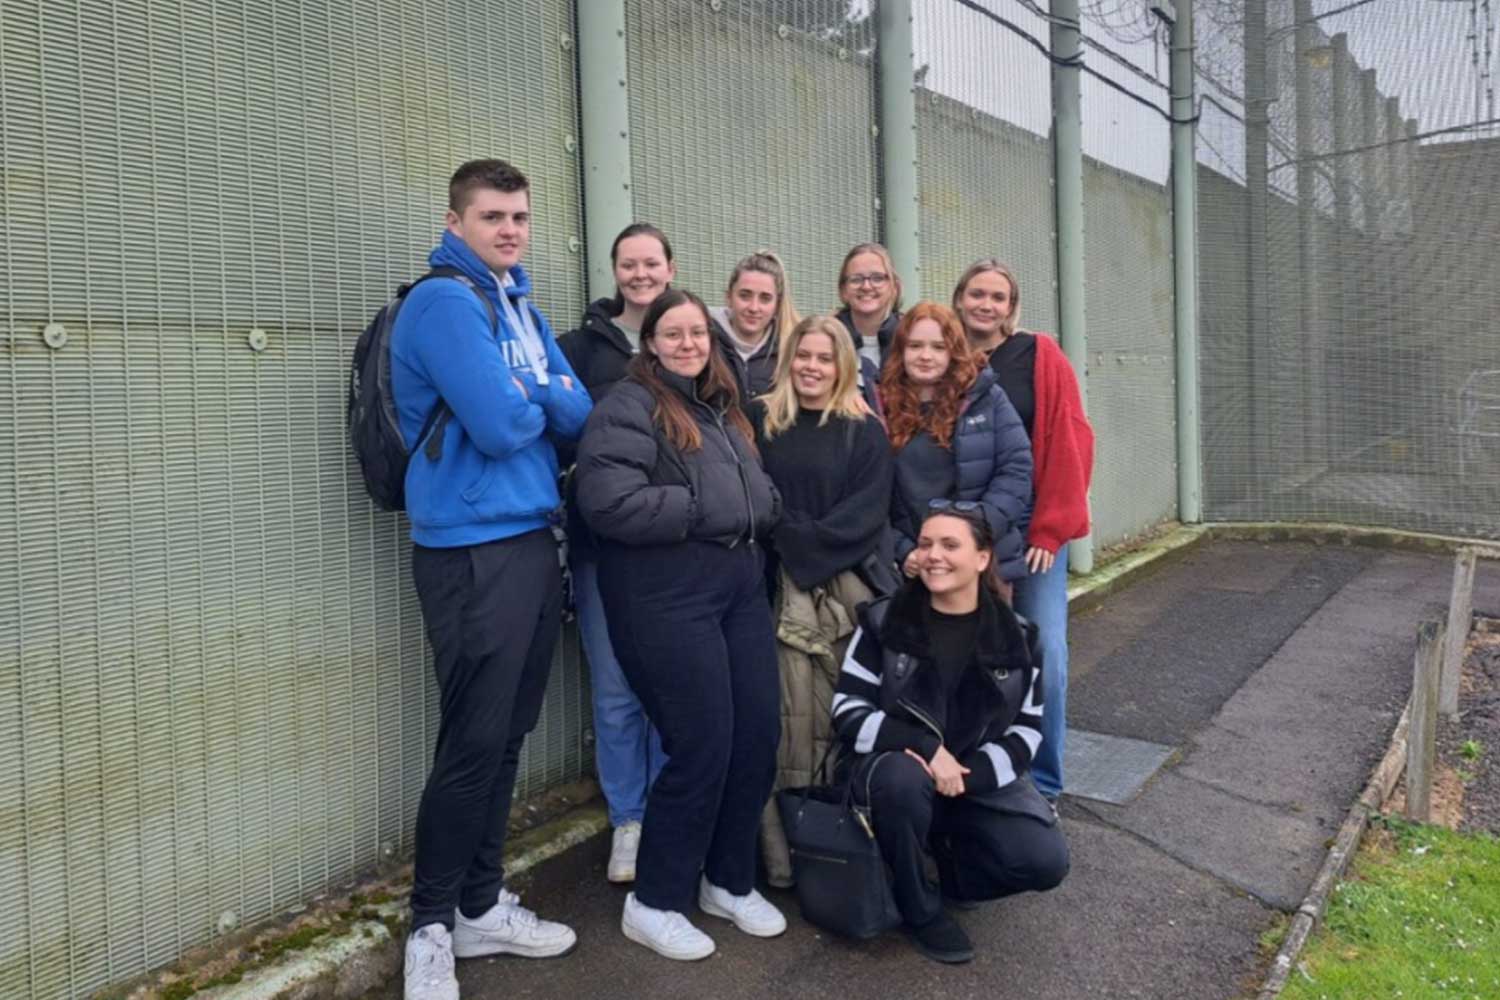 A group of nine Criminology students stand outside the boundary of HMP Erlestoke prison